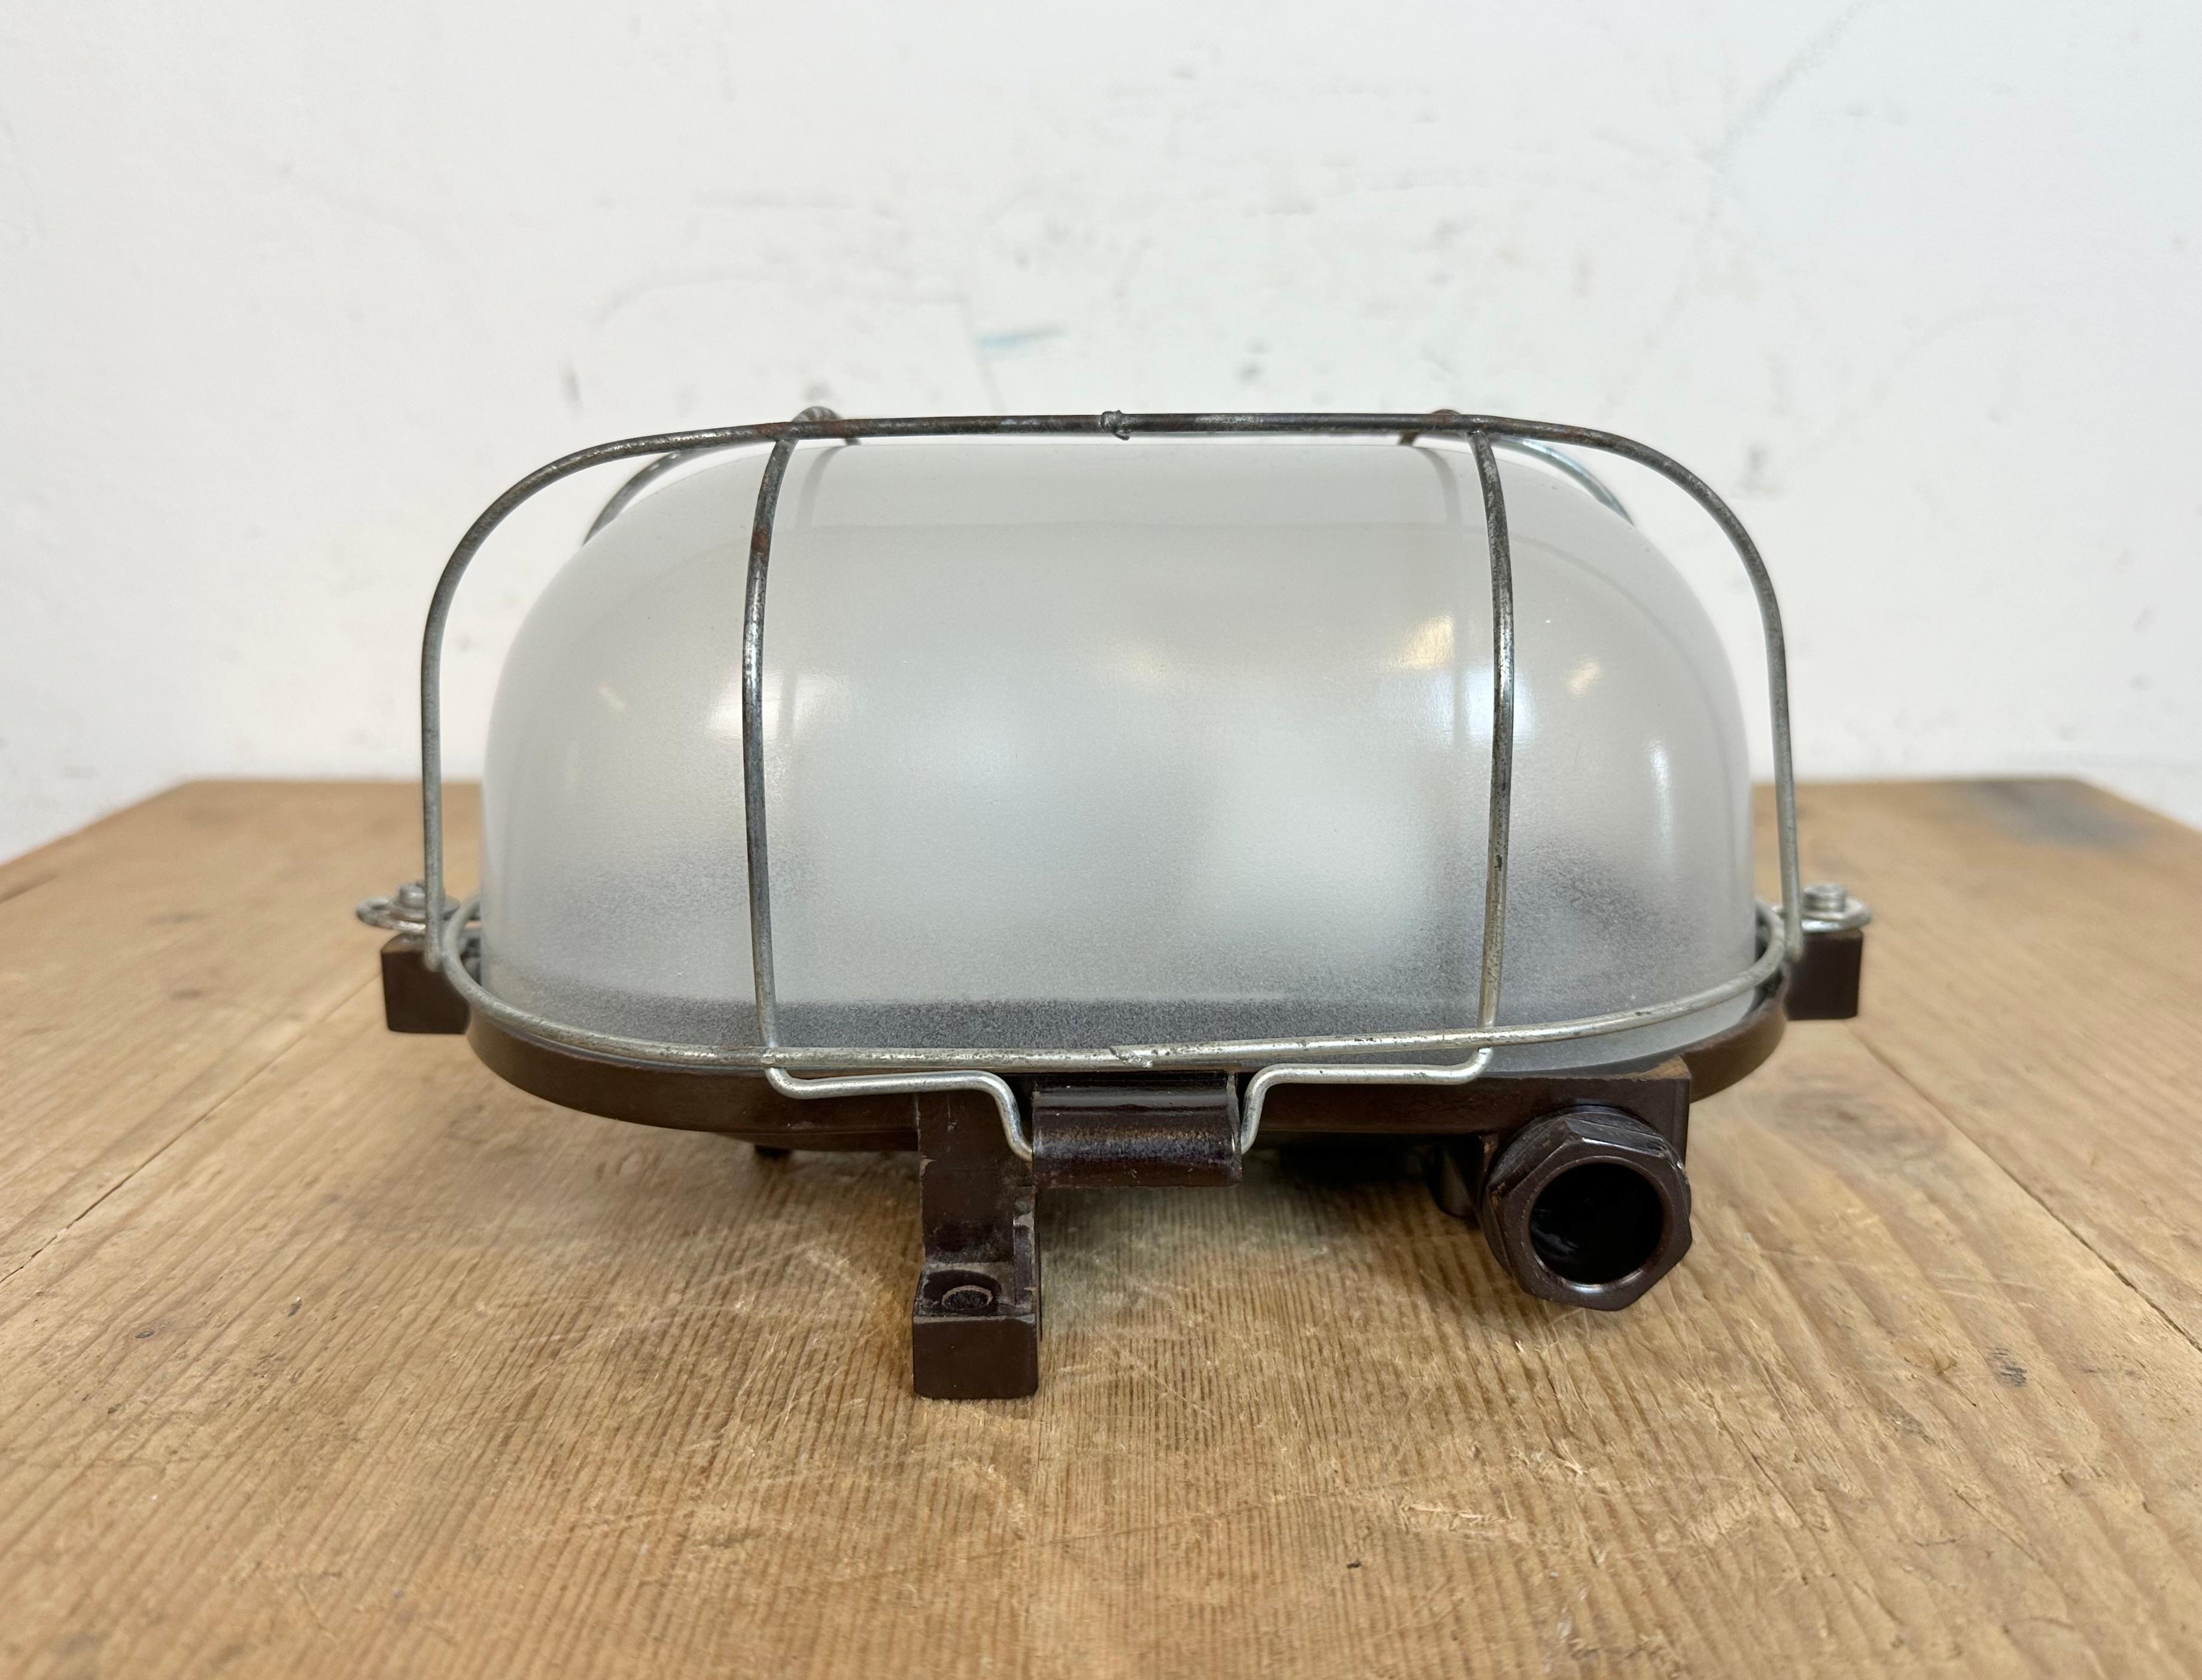 Vintage industrial brown bakelite wall lamp made in former Czechoslovakia during the 1960s. It features a bakelite body, a milk glass cover and iron grid.The socket requires standard E 27/E 26 light bulbs.  Weight of the lamp is 1 kg.